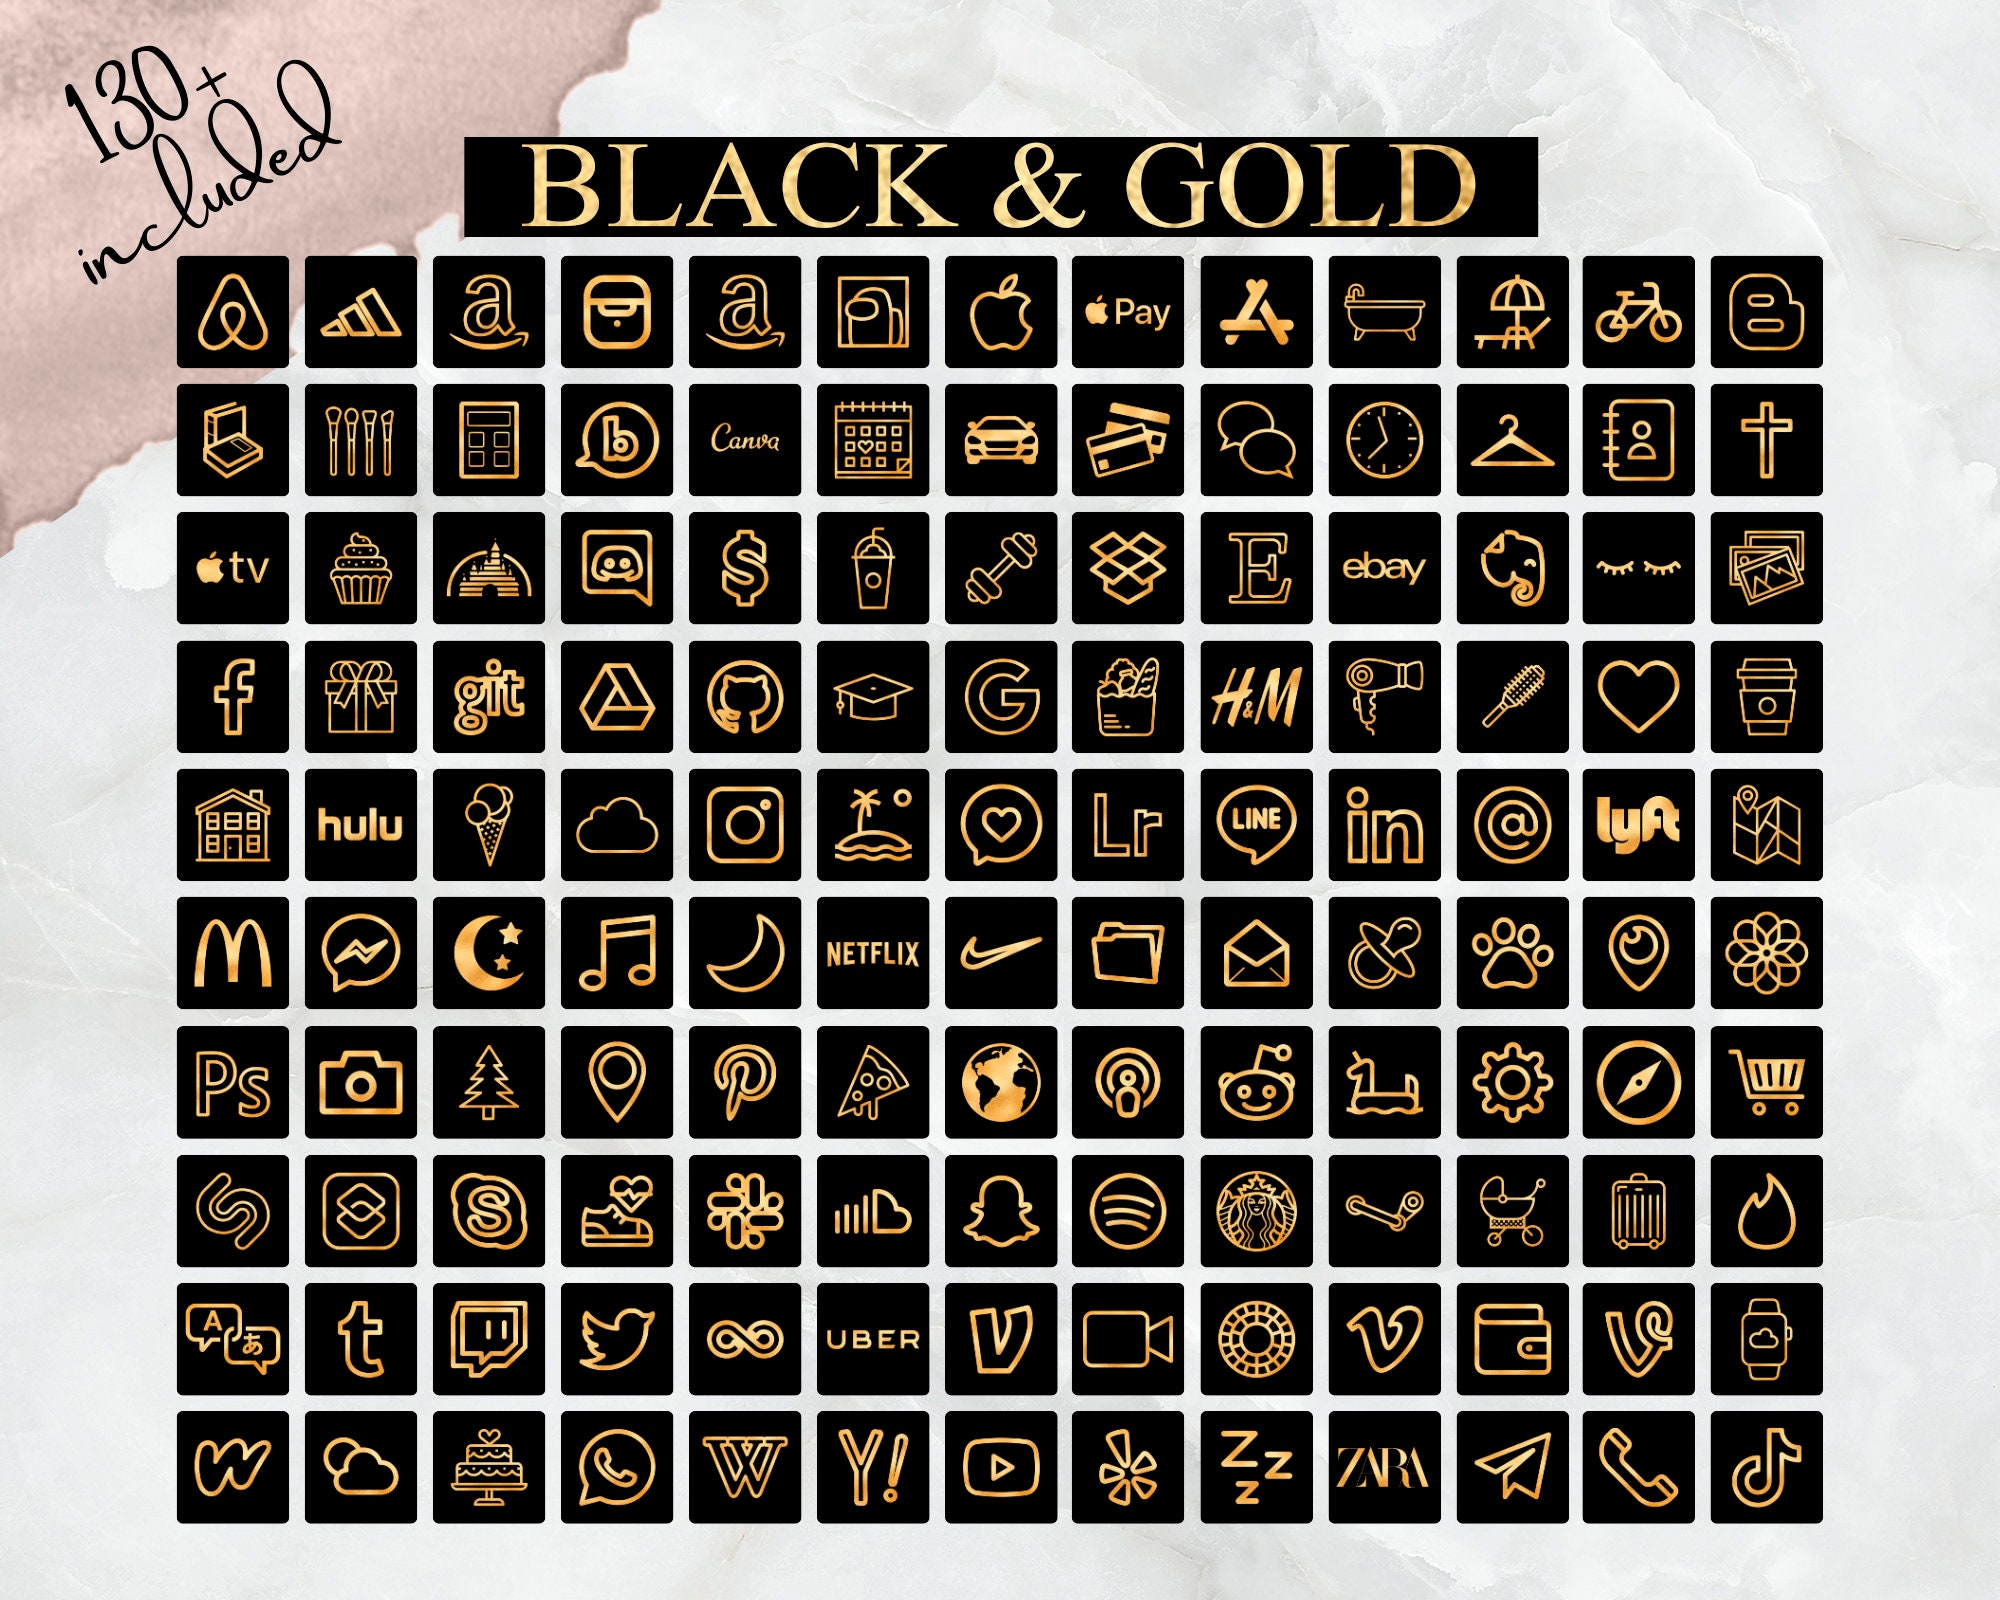 IOS14 App Icons Black Gold IOS 14 Icons App Covers Icons | Etsy